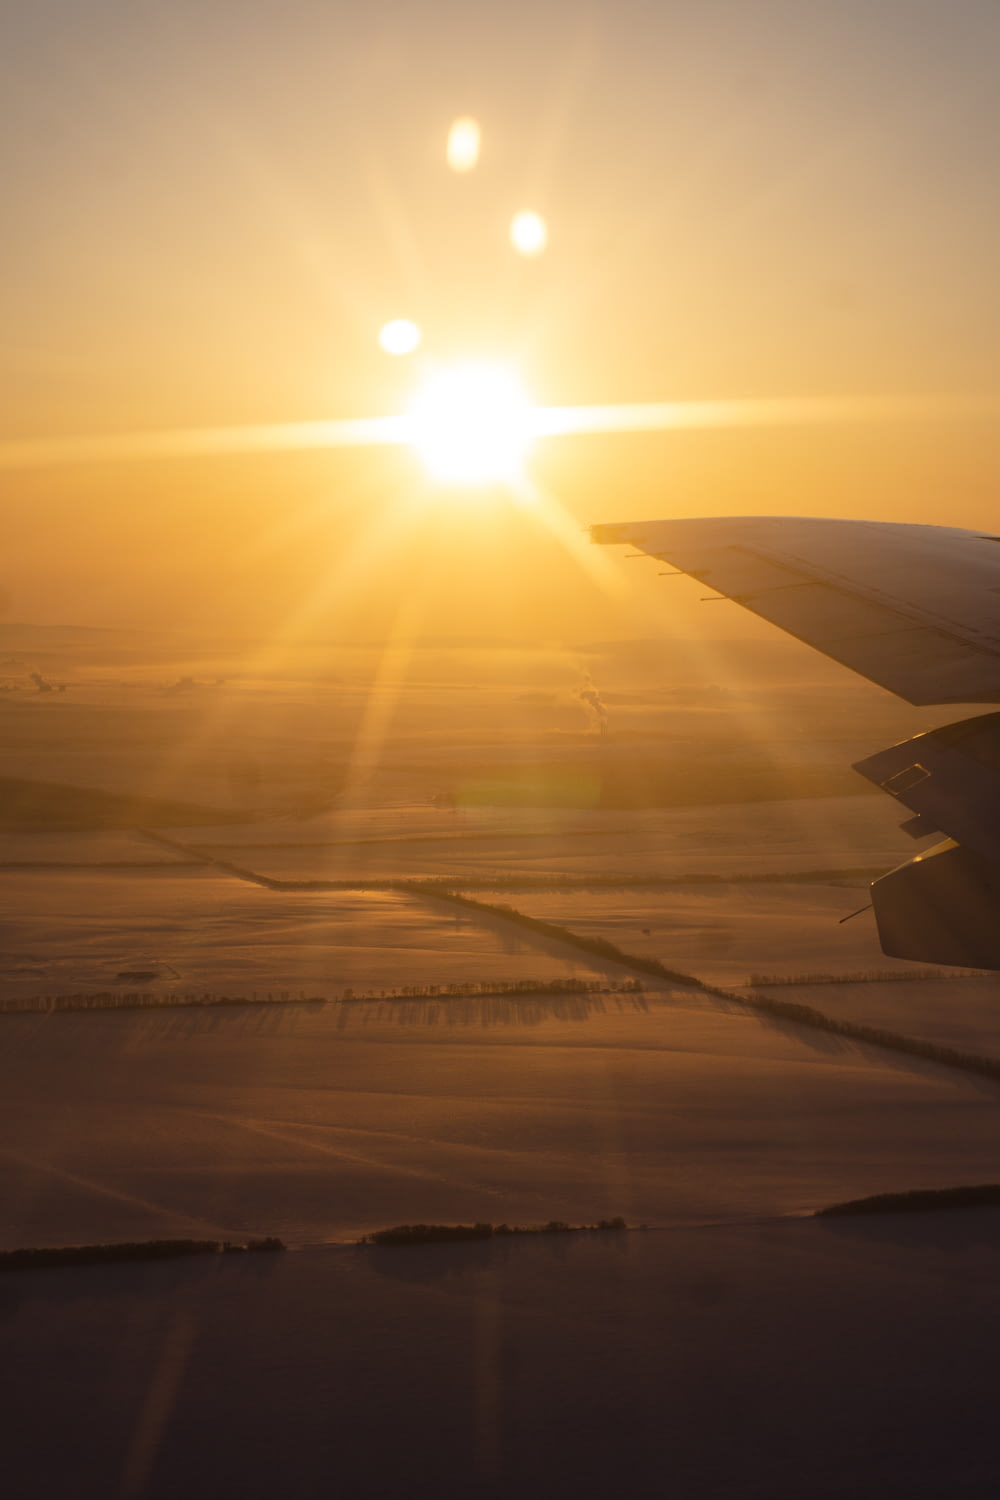 the sun setting over a plane wing